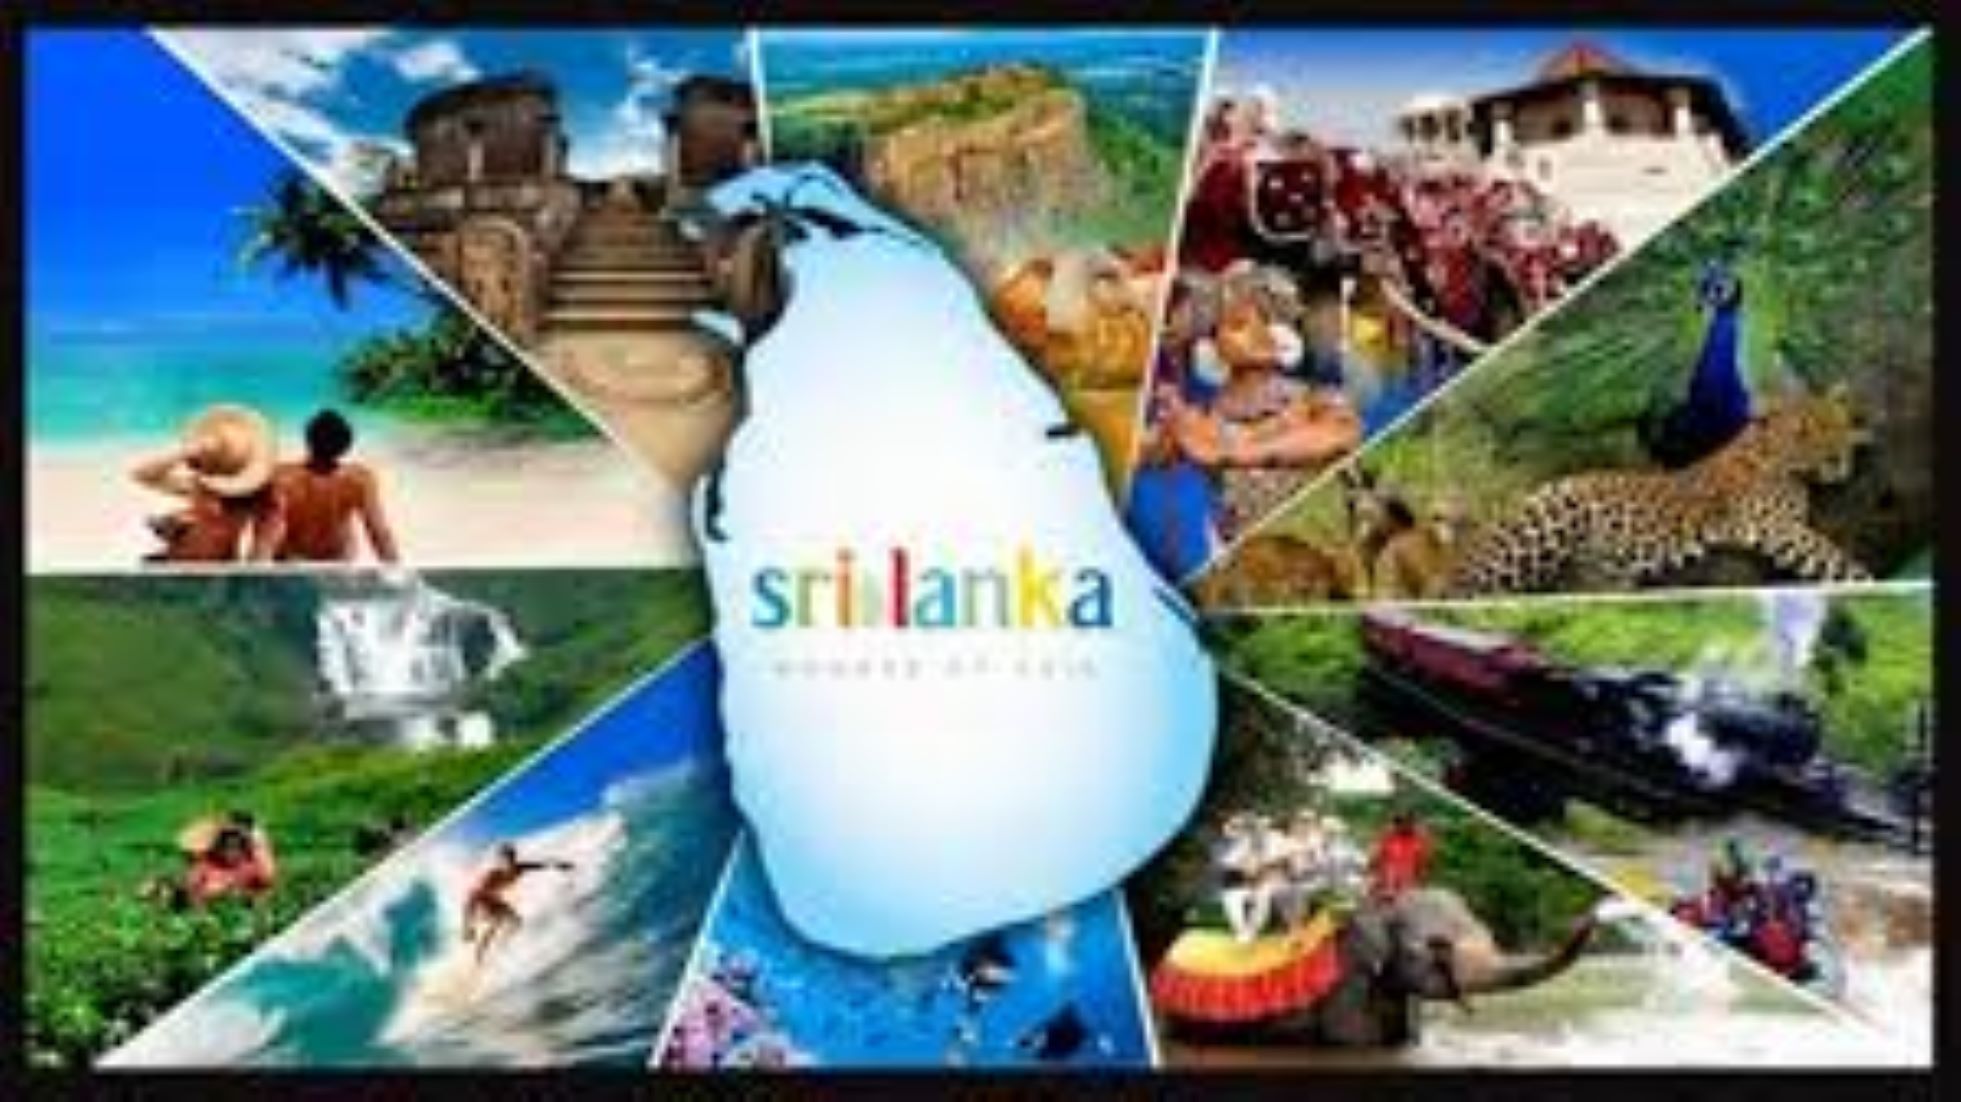 Sri Lanka Makes Record Earnings From Tourism In First 45 Days Of This Year